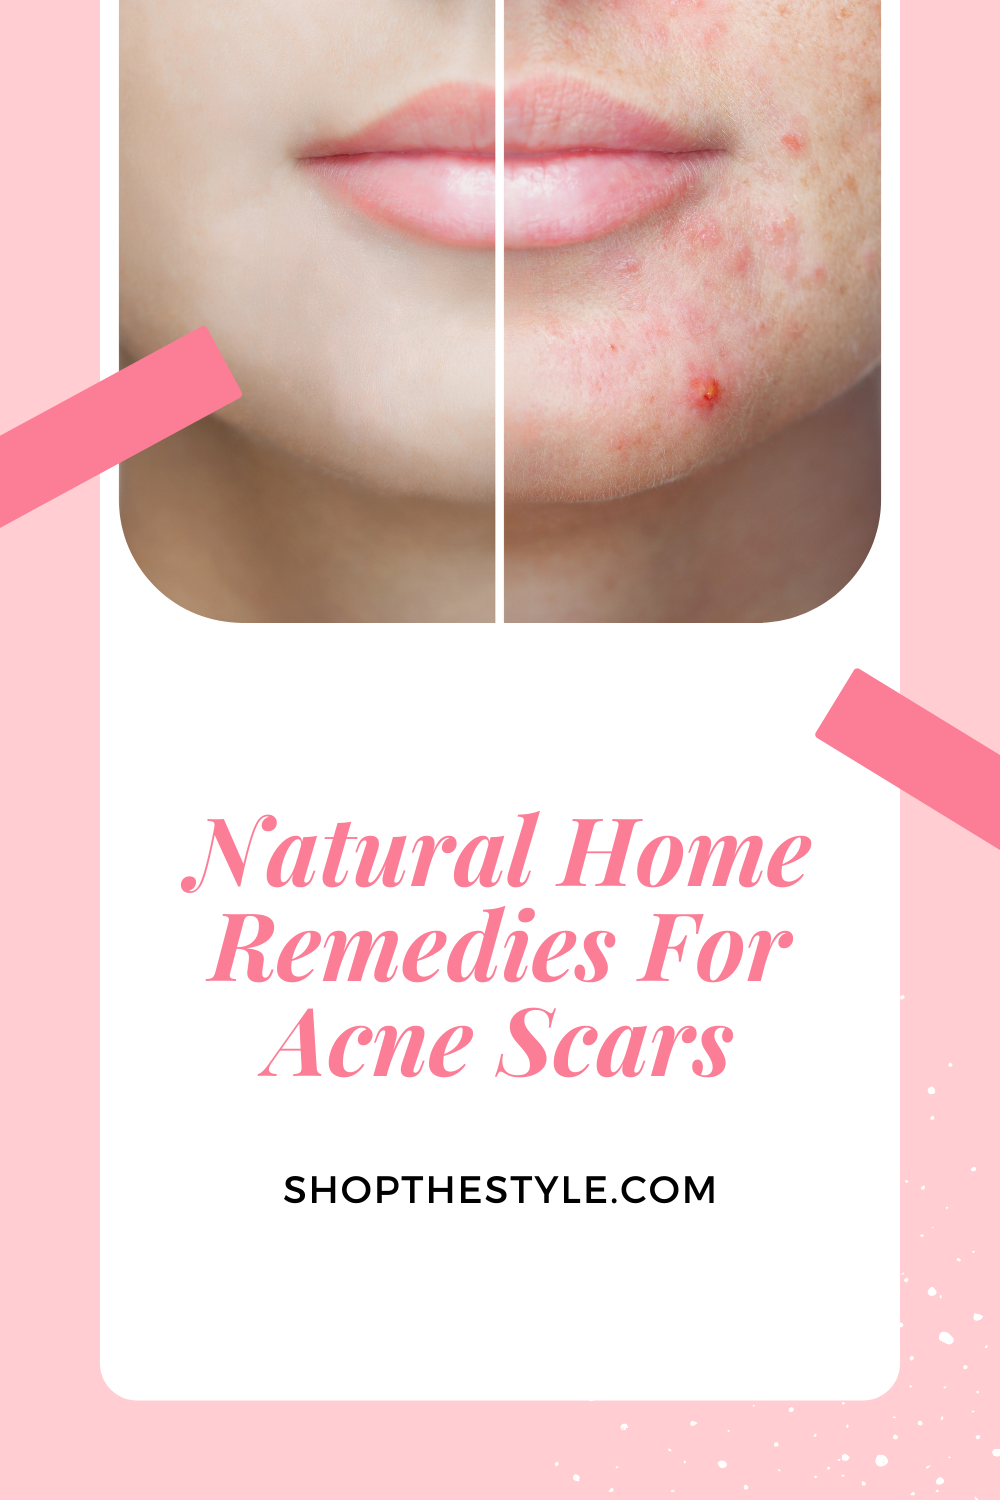 Natural Home Remedies For Acne Scars